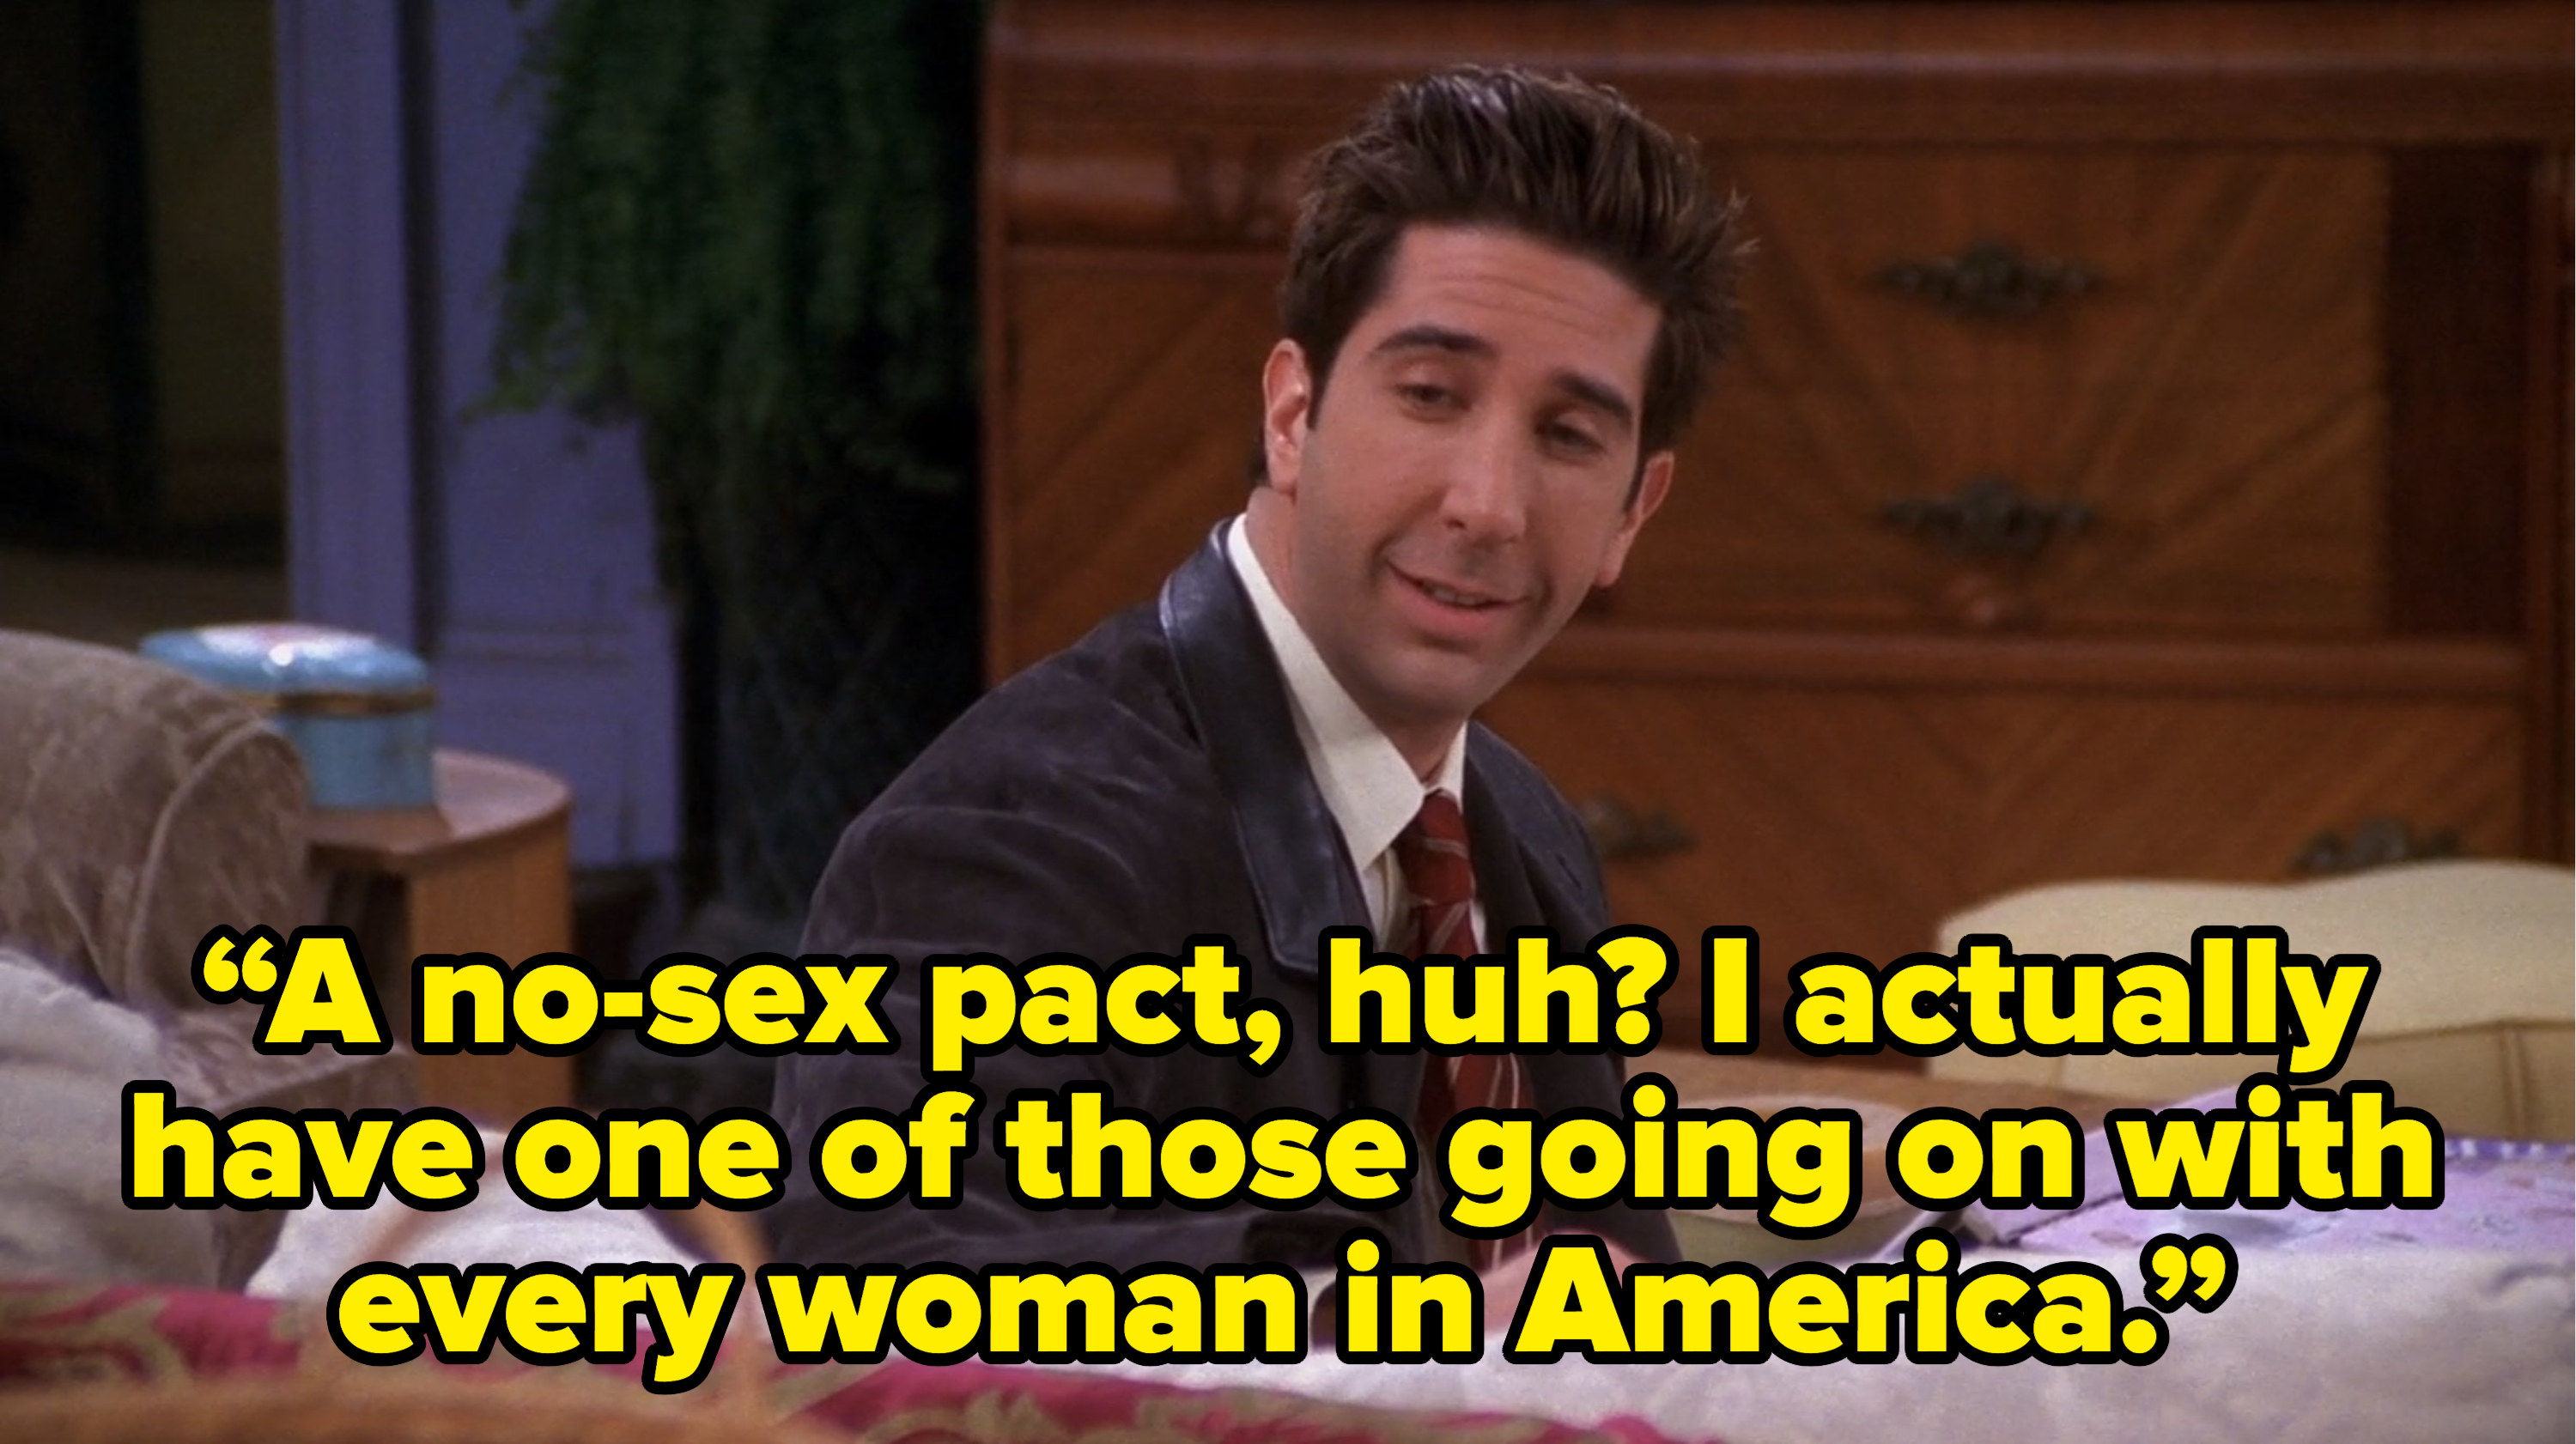 ross saying “A no-sex pact, huh? I actually have one of those going on with every woman in America.” on friends